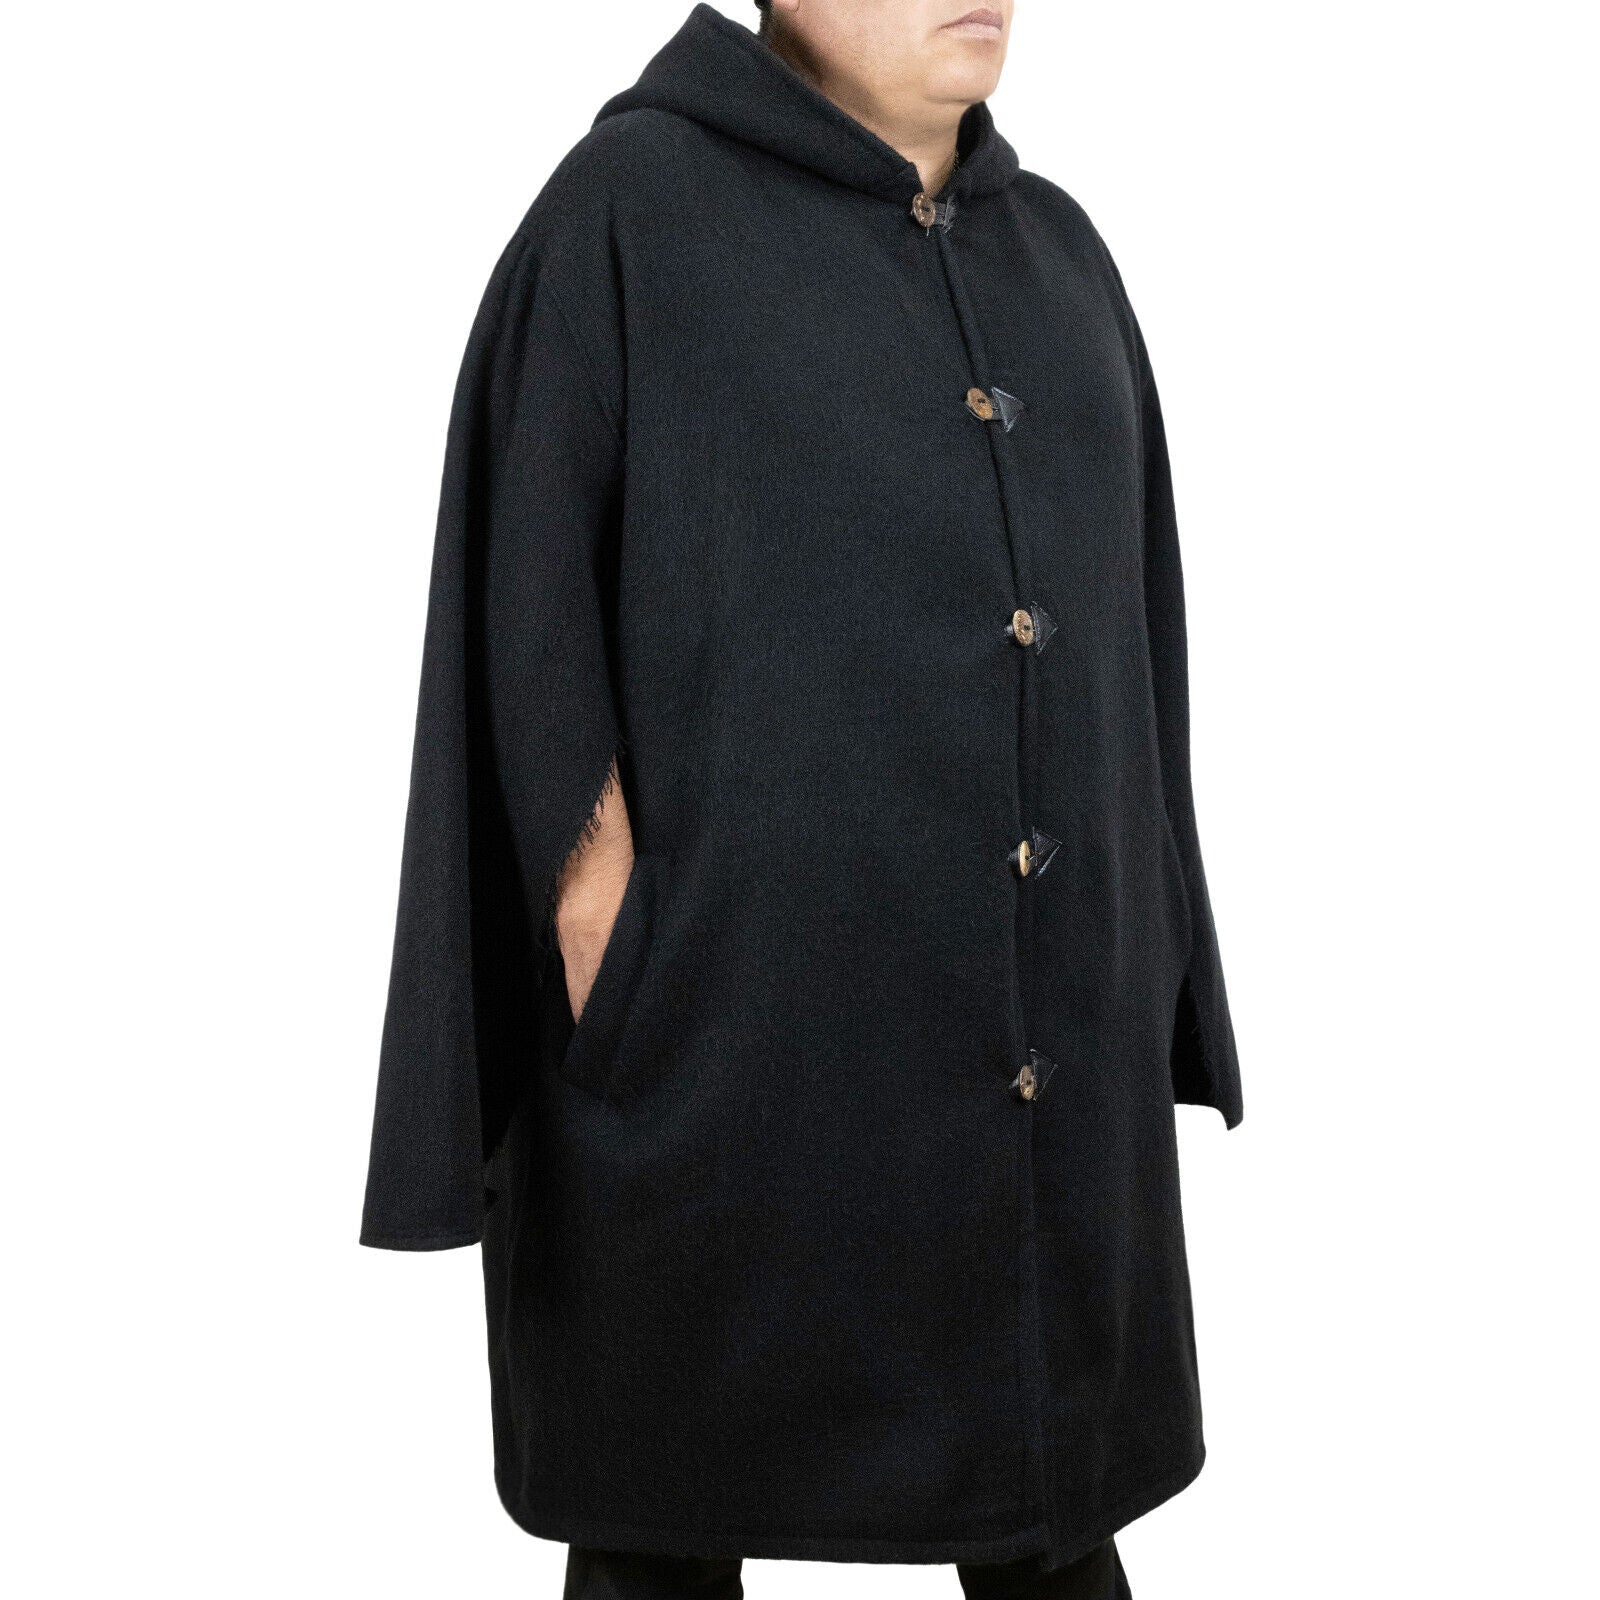 Tangula - Alpaca Wool Unisex South American Handwoven Hooded Coat Jedi Poncho with sleeves - solid black